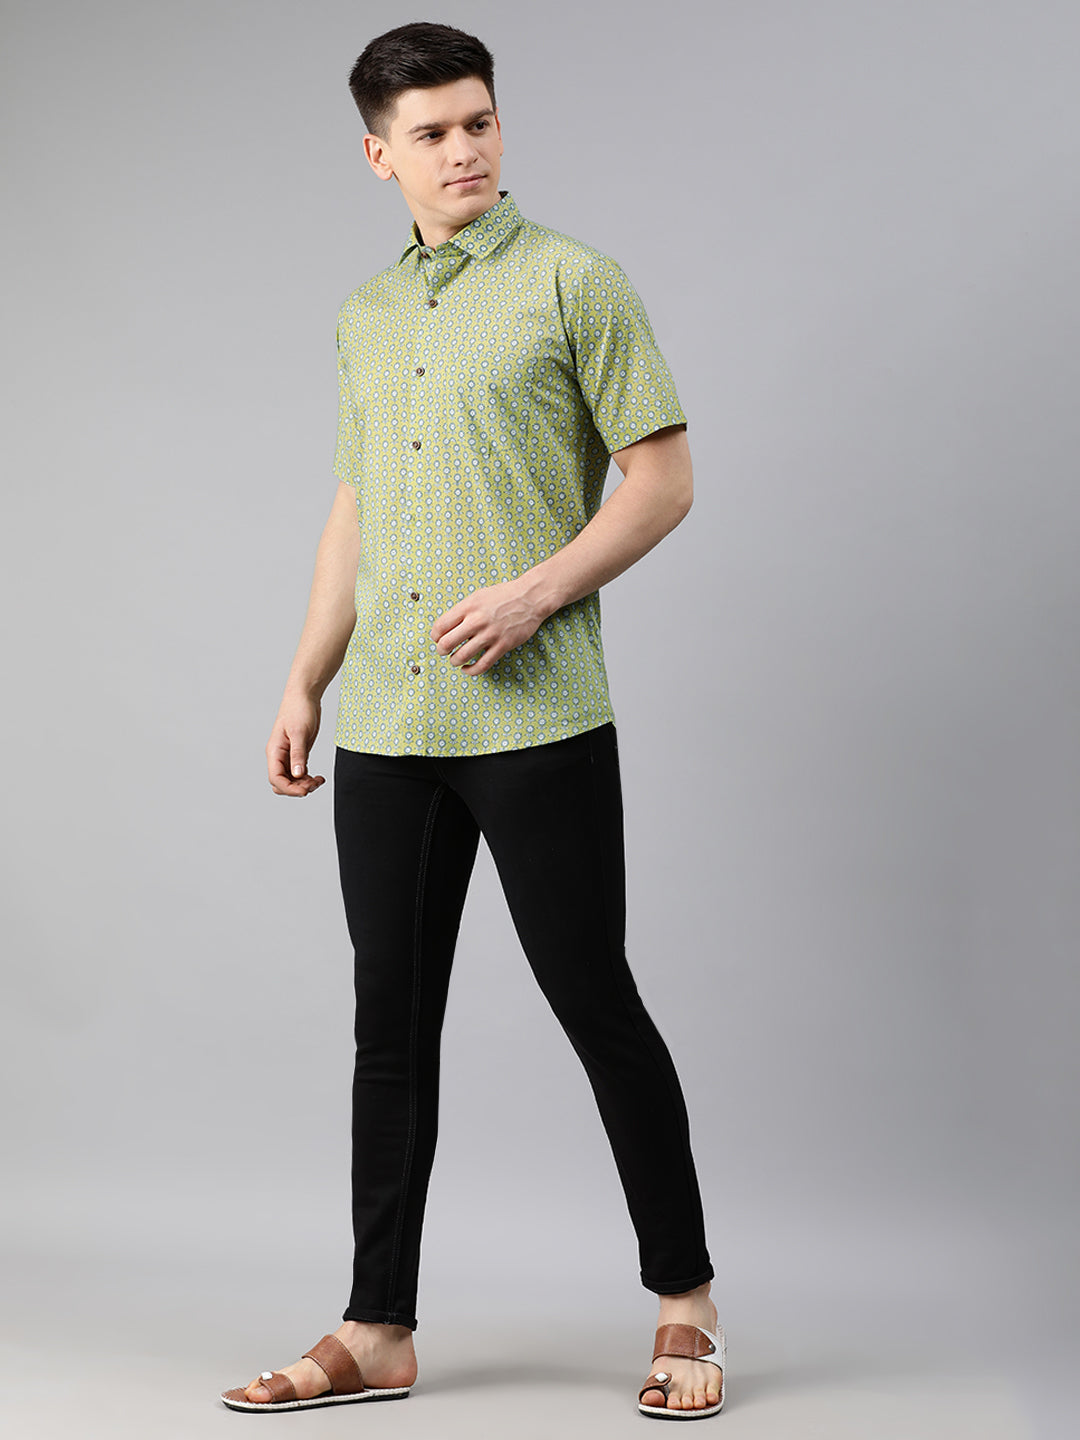 Yellow Cotton Short Sleeves Shirts For Men